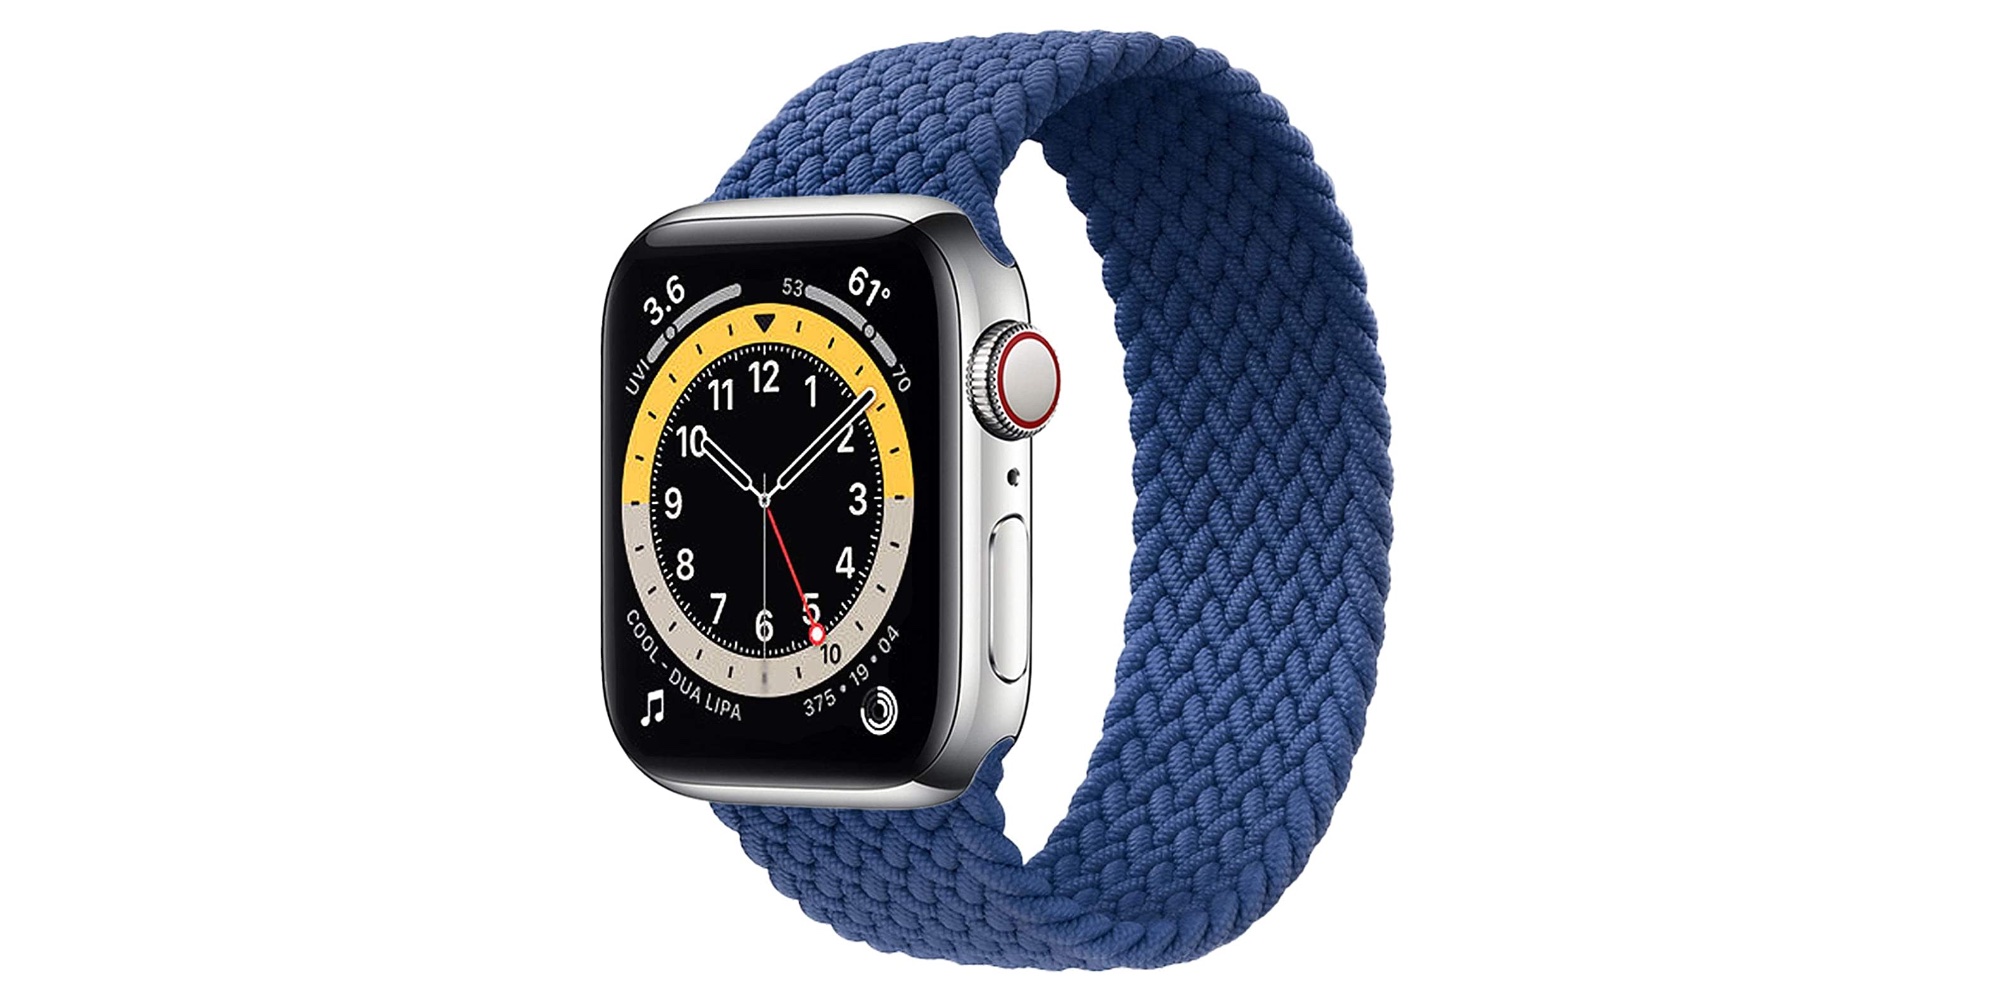 Score this braided Solo Loop Apple Watch band while it's down to $17